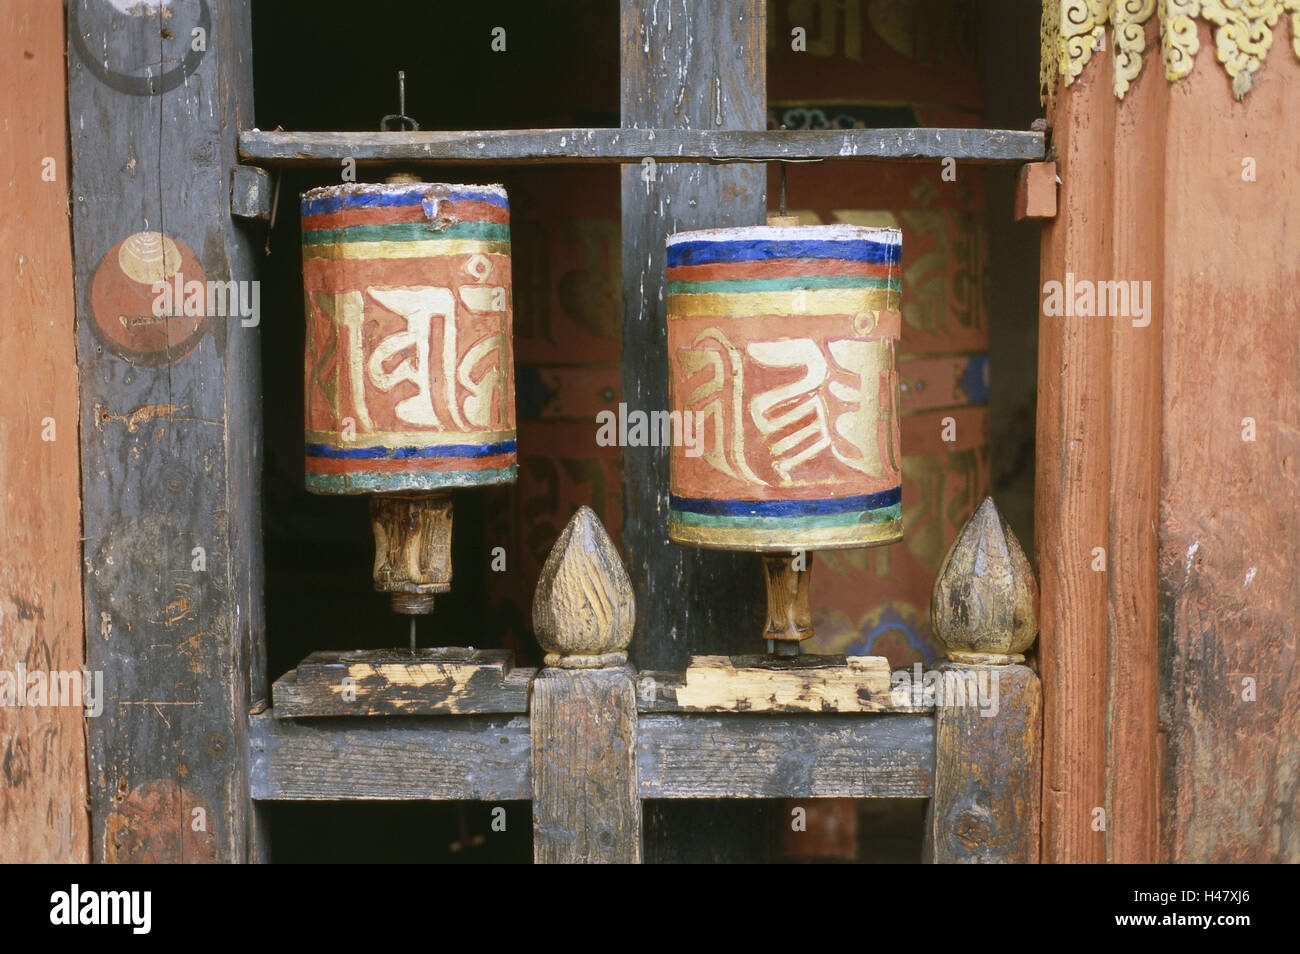 Bhutan, Bumthang, building, facade, prayer mills, Asia, the Himalayas, kingdom, Zentralbhutan, culture, religion, faith, Buddhism, niche, defensive wall broad, case, two, detail, rotate, ritual, sacred, religiously, devotion, prayers, Mantras, nobody, outside, Stock Photo